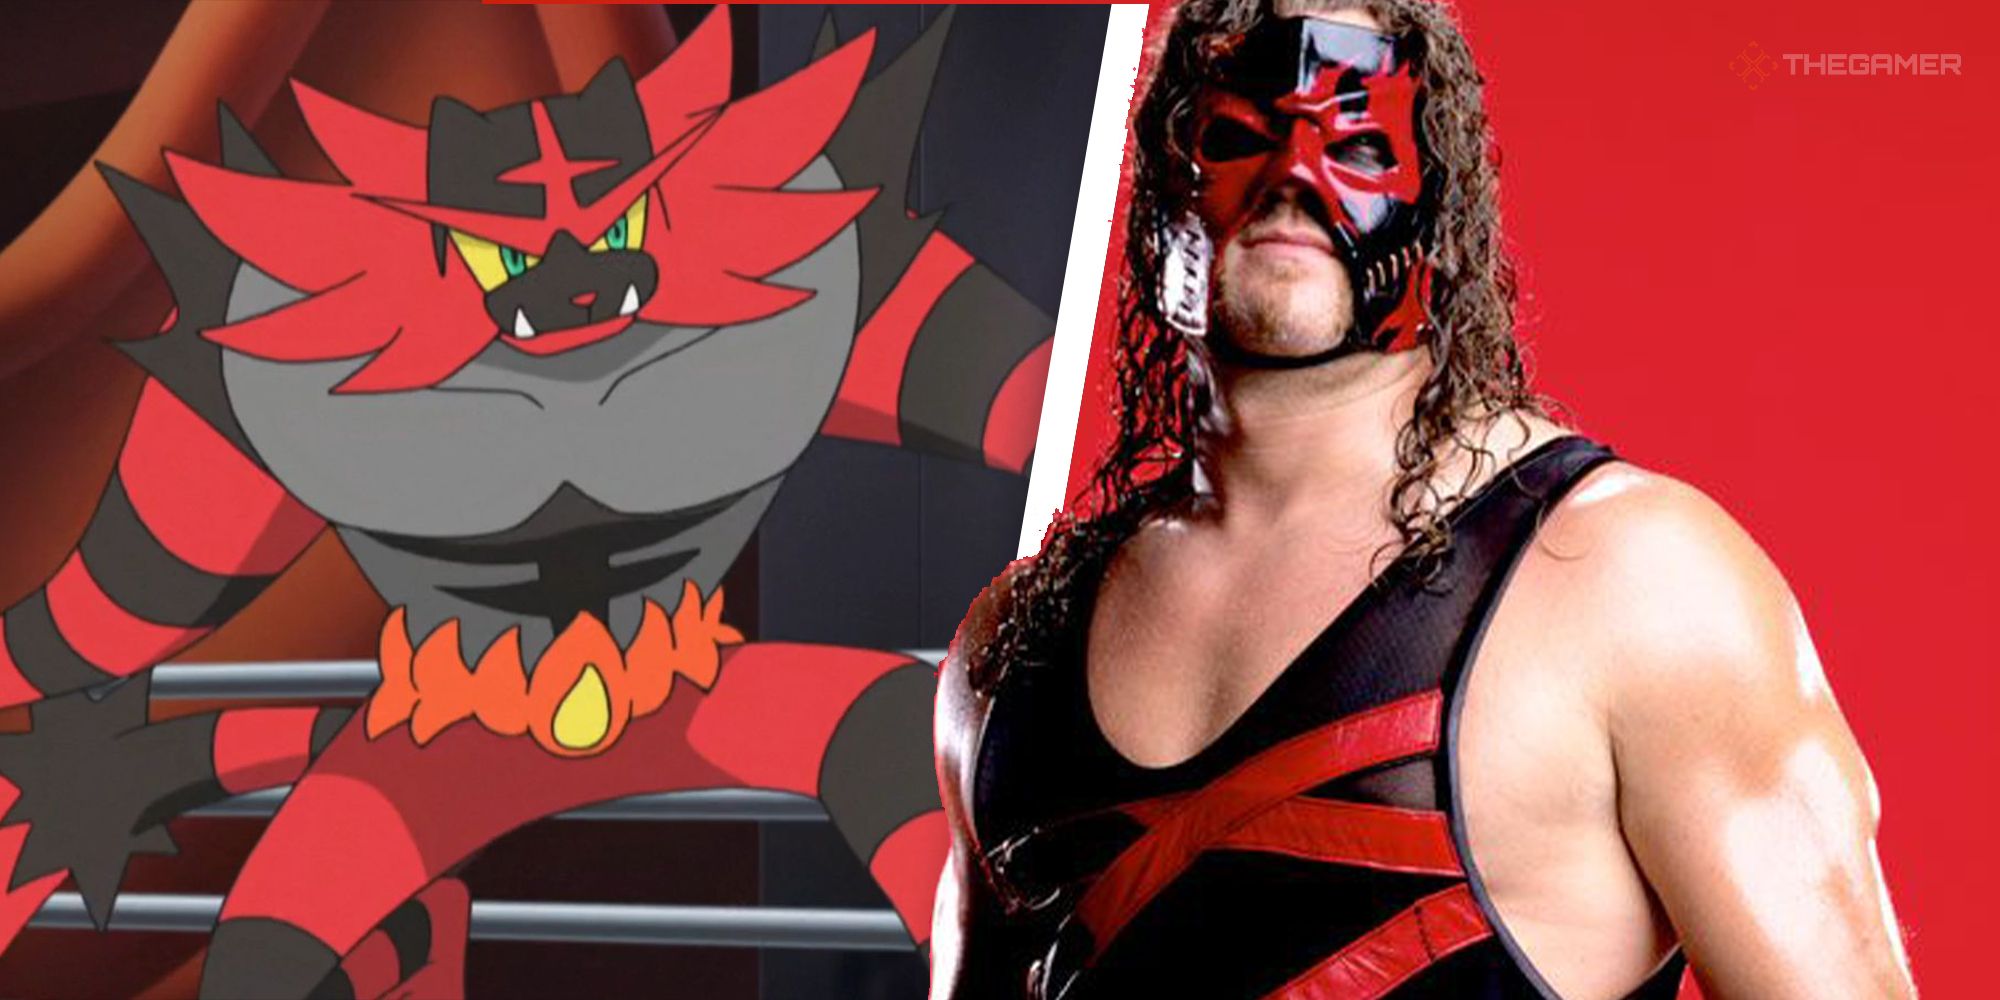 Heres 30 Wrestlers As Pokemon For The Royal Rumble (14)